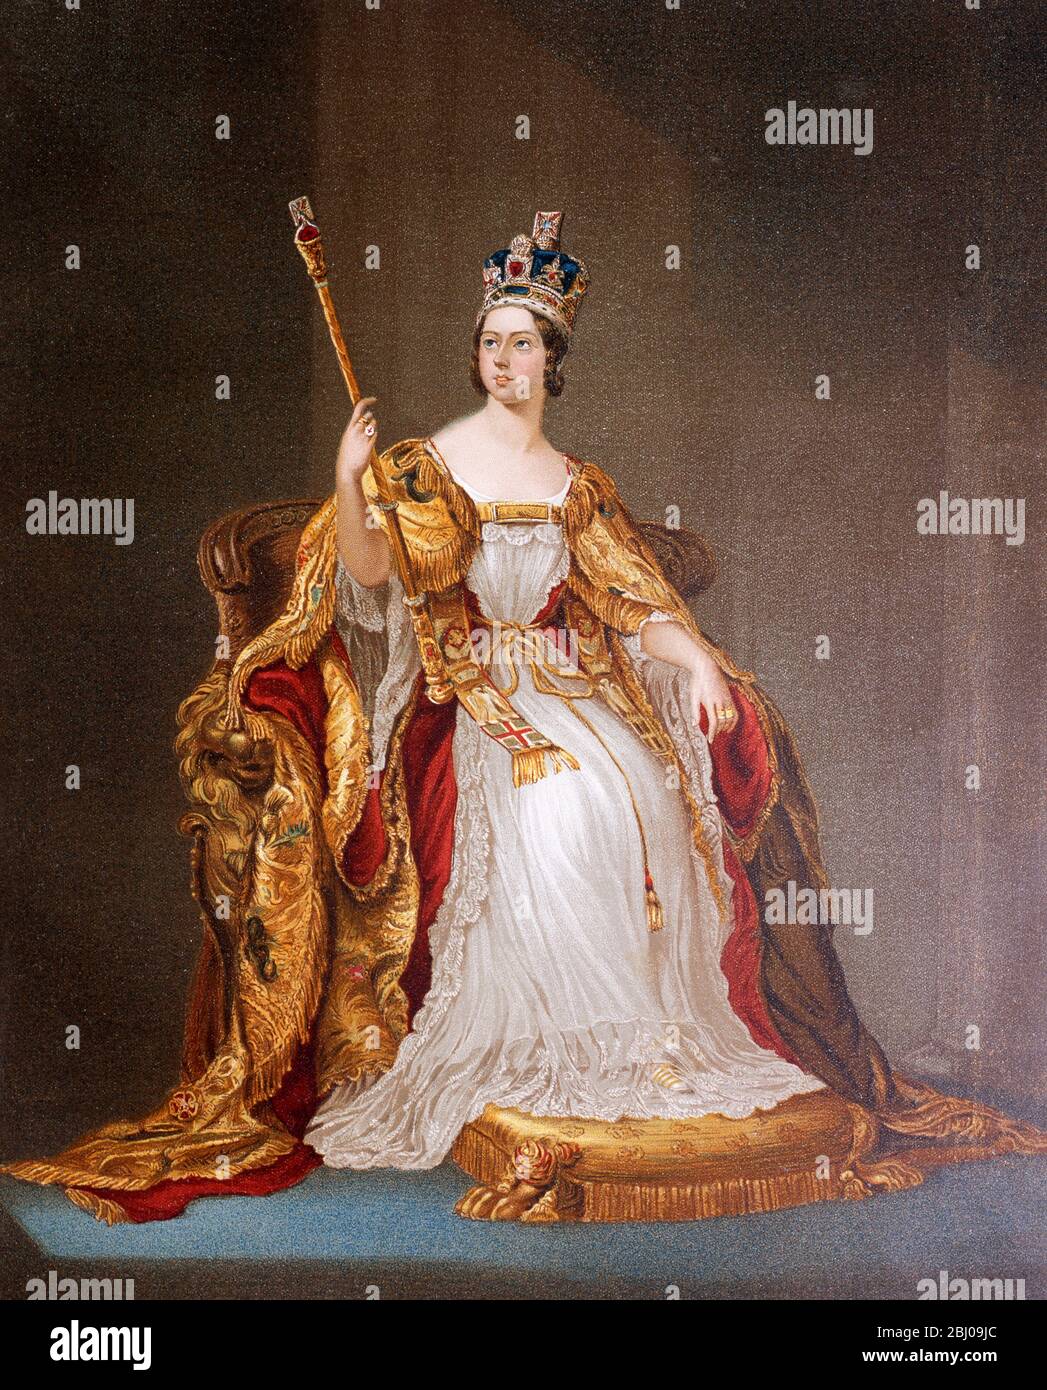 Queen Victoria in coronation dress 20 June 1837 - Many foods are named after Queen Victoria, including Victoria plums and Victoria sponge. Stock Photo